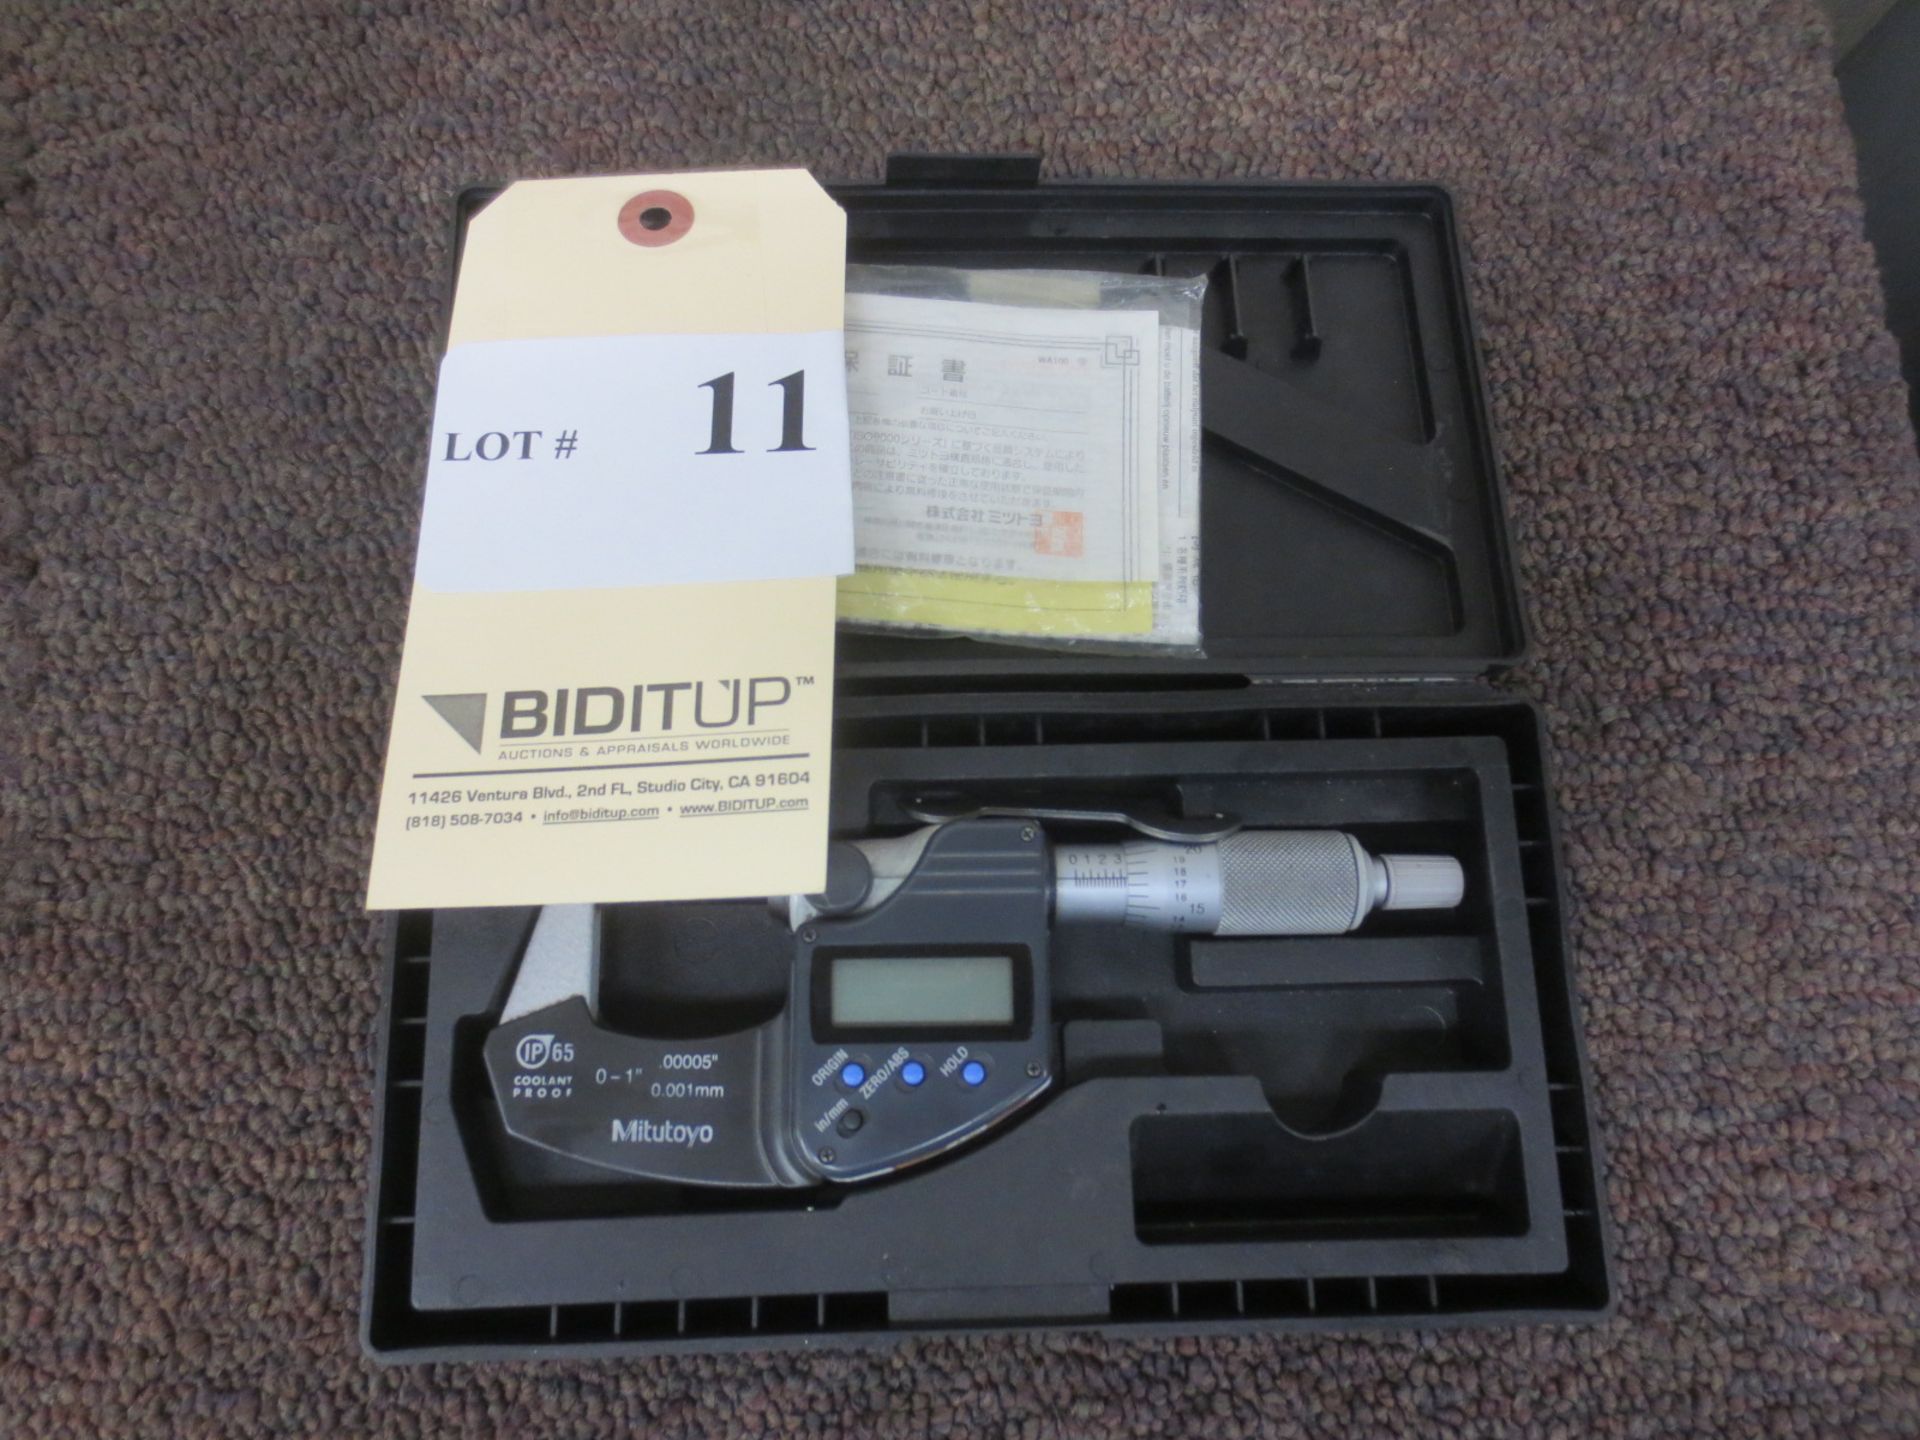 Mitutoyo 0-1'' Micrometer With Digital Readout And Case